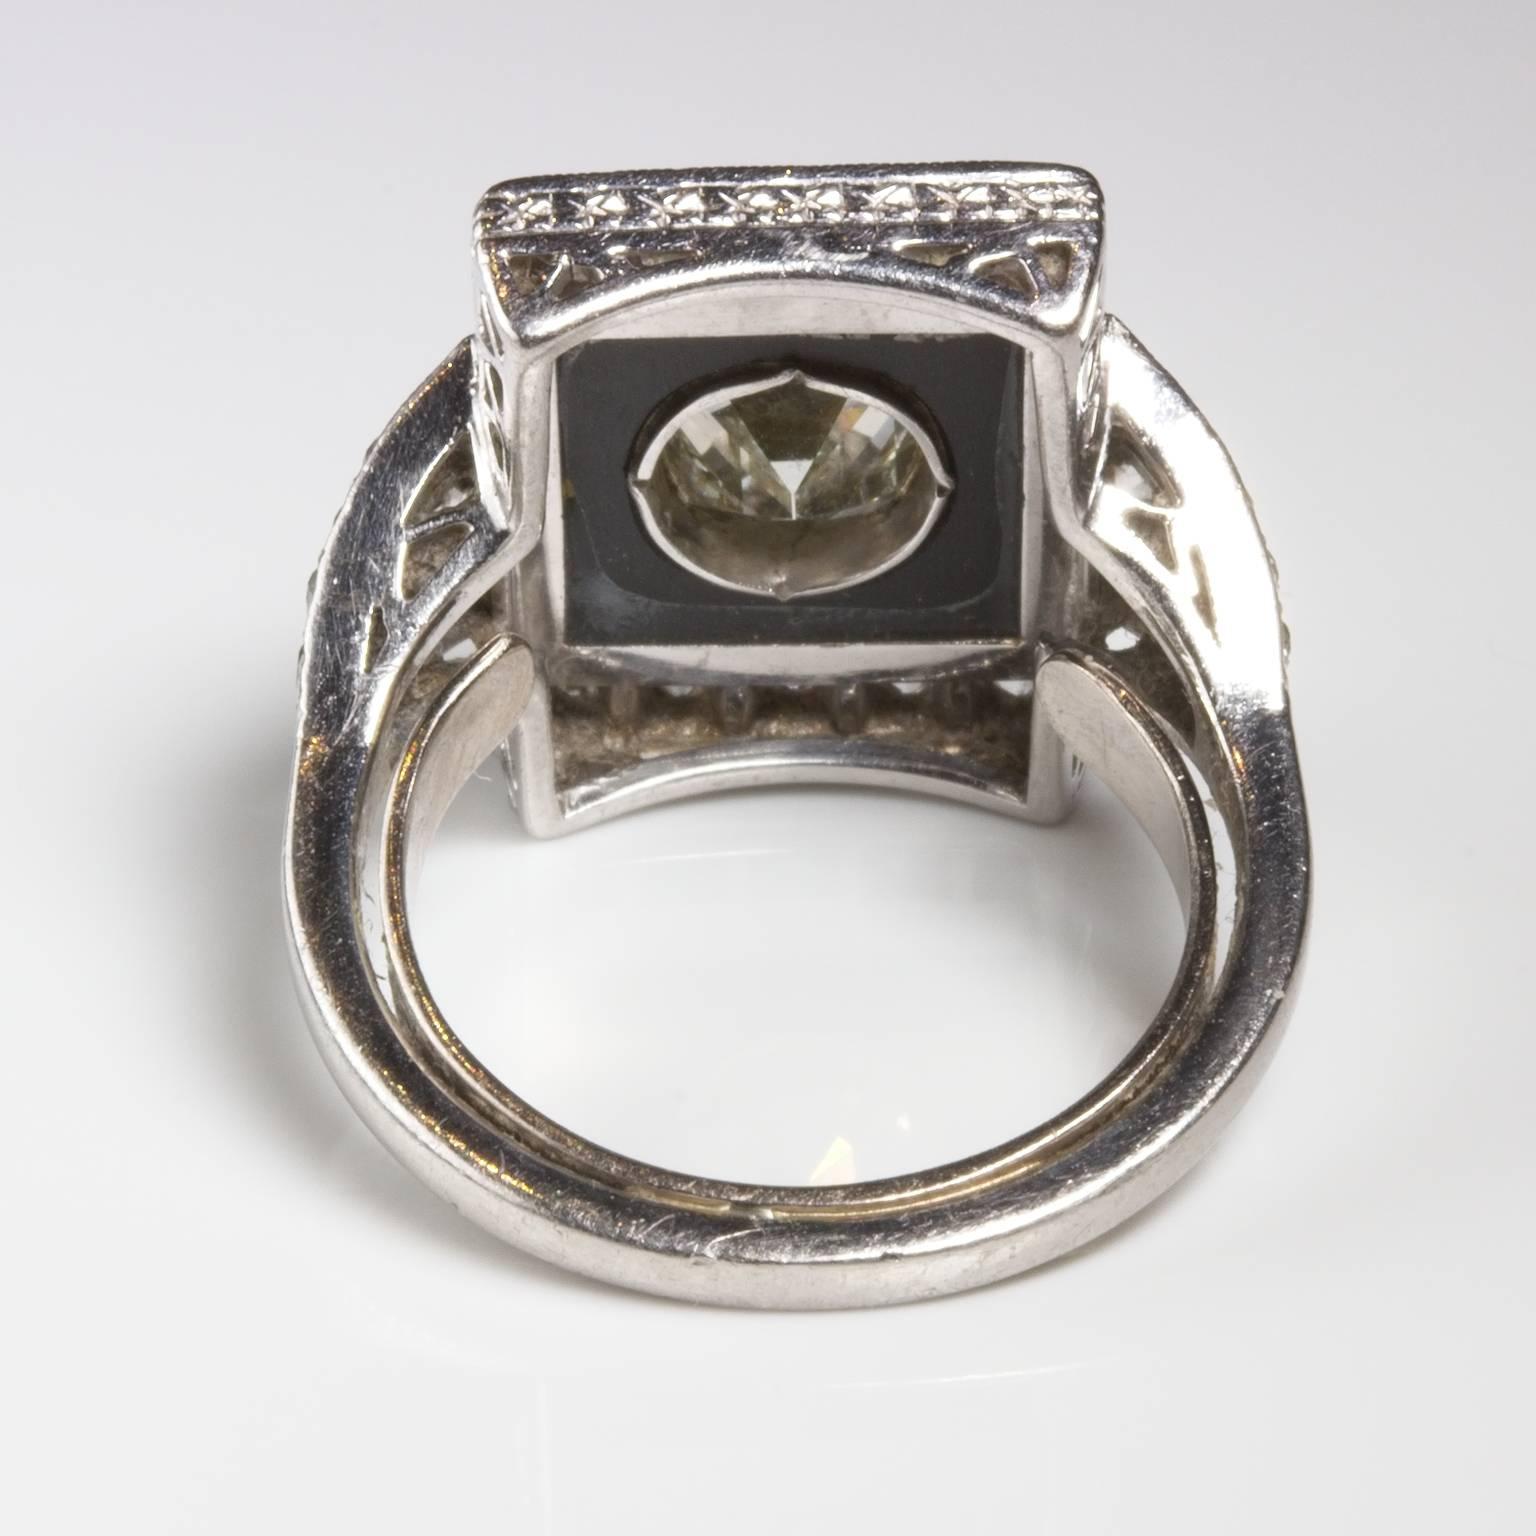 Art Deco 2.62 Carat Diamond Onyx Cocktail Ring In Excellent Condition For Sale In Perth, AU